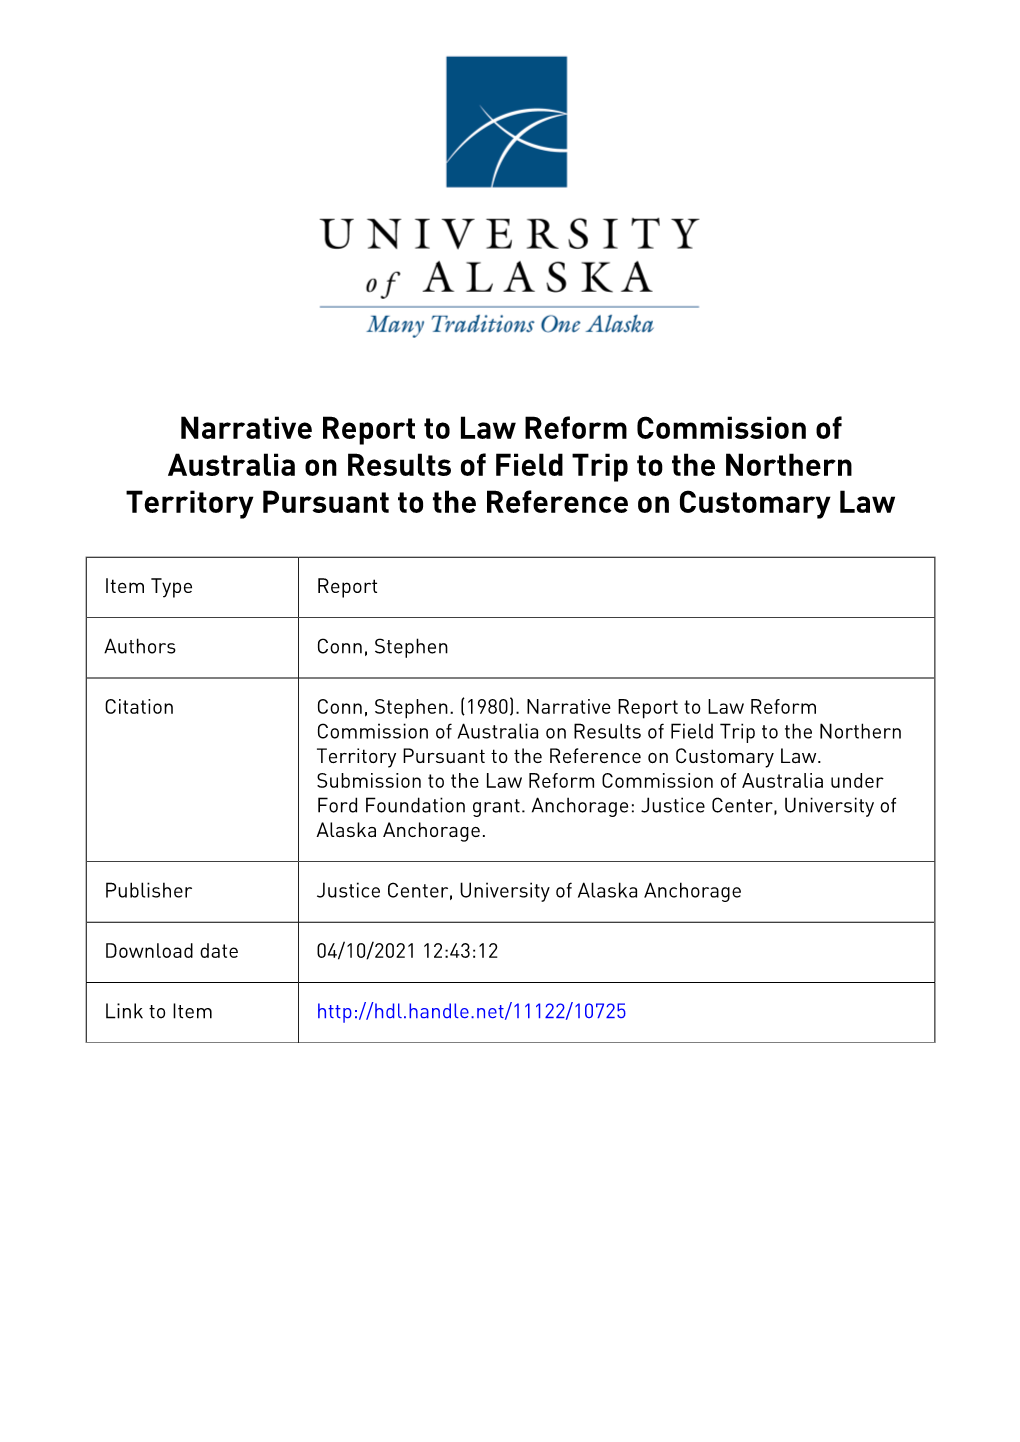 Narrative Report to Law Reform Commission of Australia on Results of Field Trip to the Northern Territory Pursuant to the Reference on Customary Law